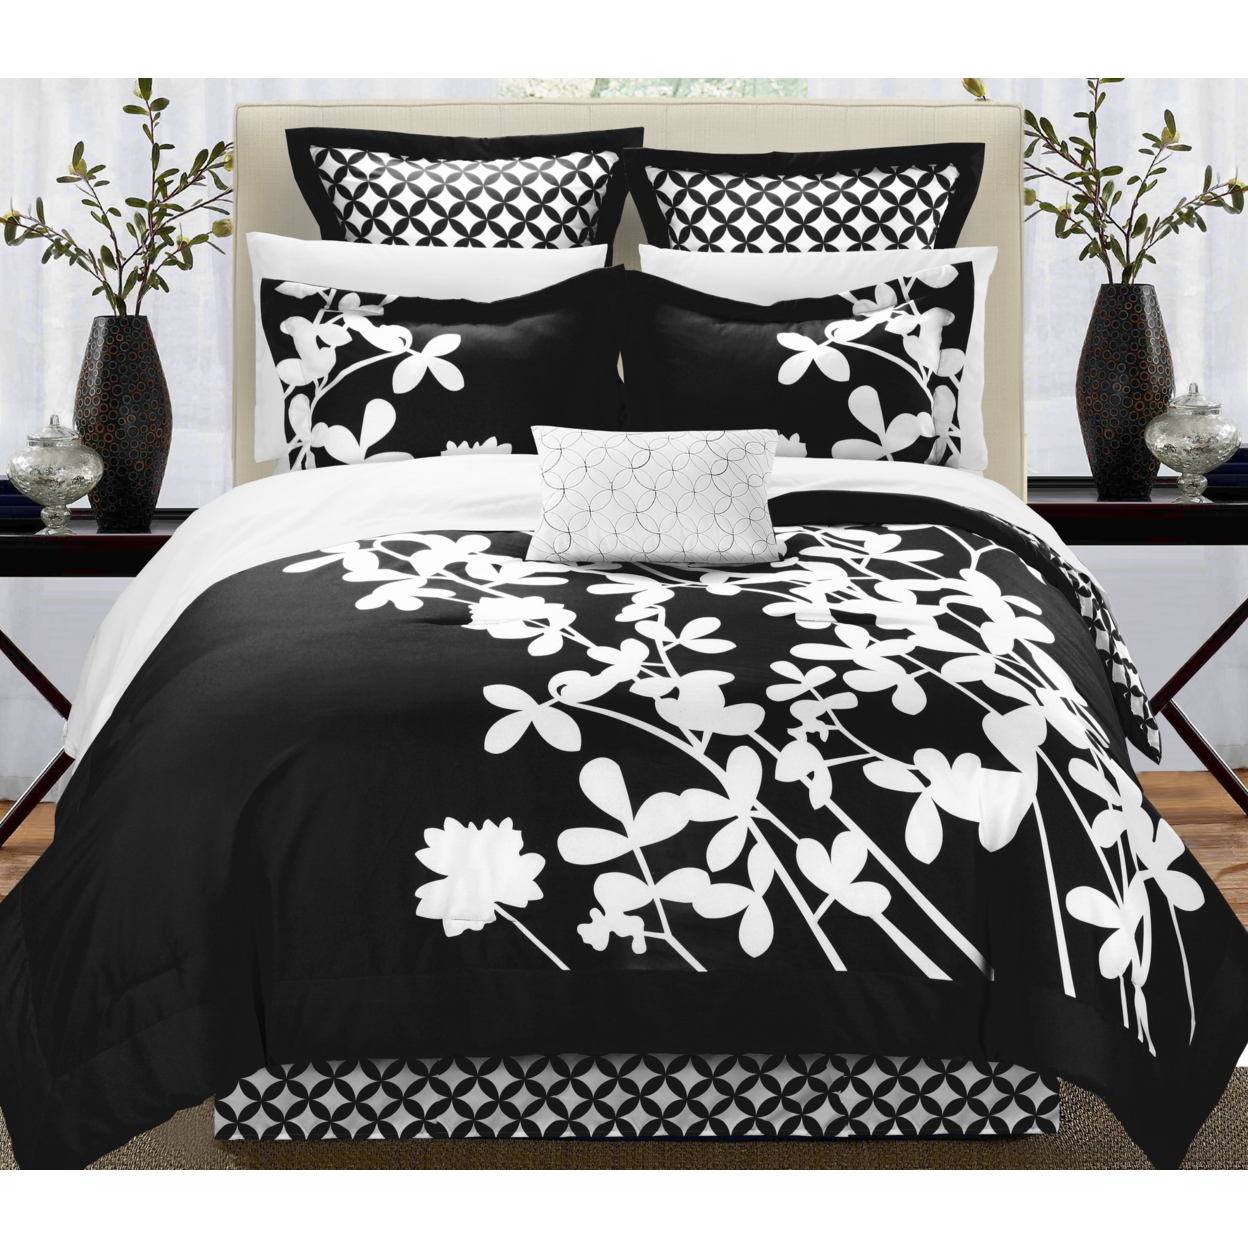 7 Piece Sire Reversible Large Scale Floral Design Printed With Diamond Pattern Reverse Comforter - Black, King